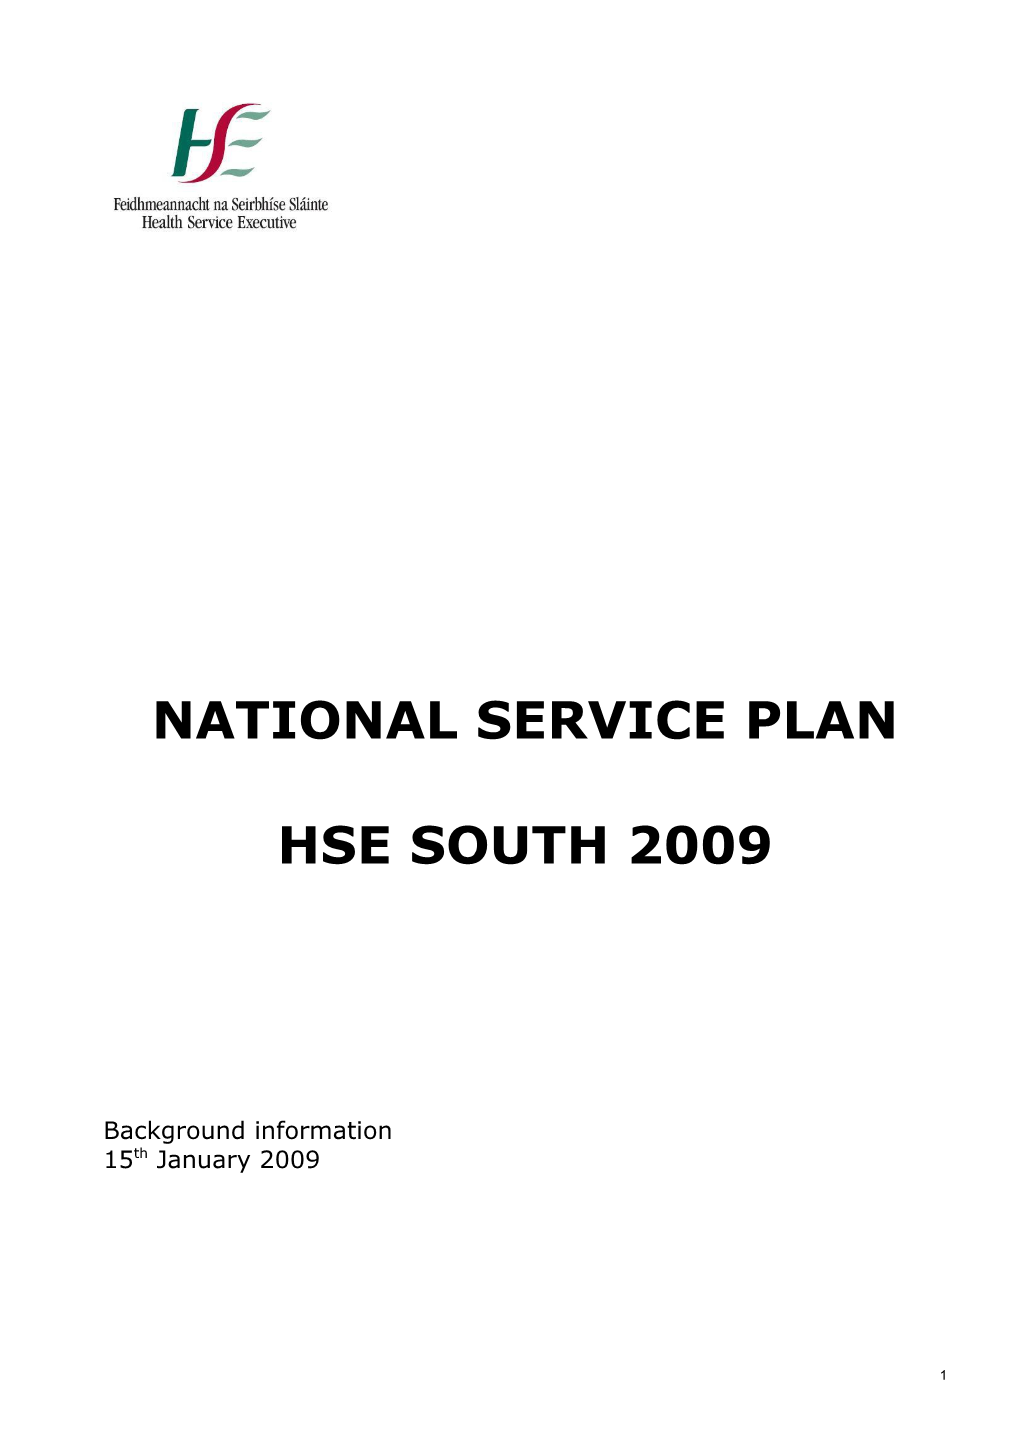 National Service Plan 2009 - Introduction